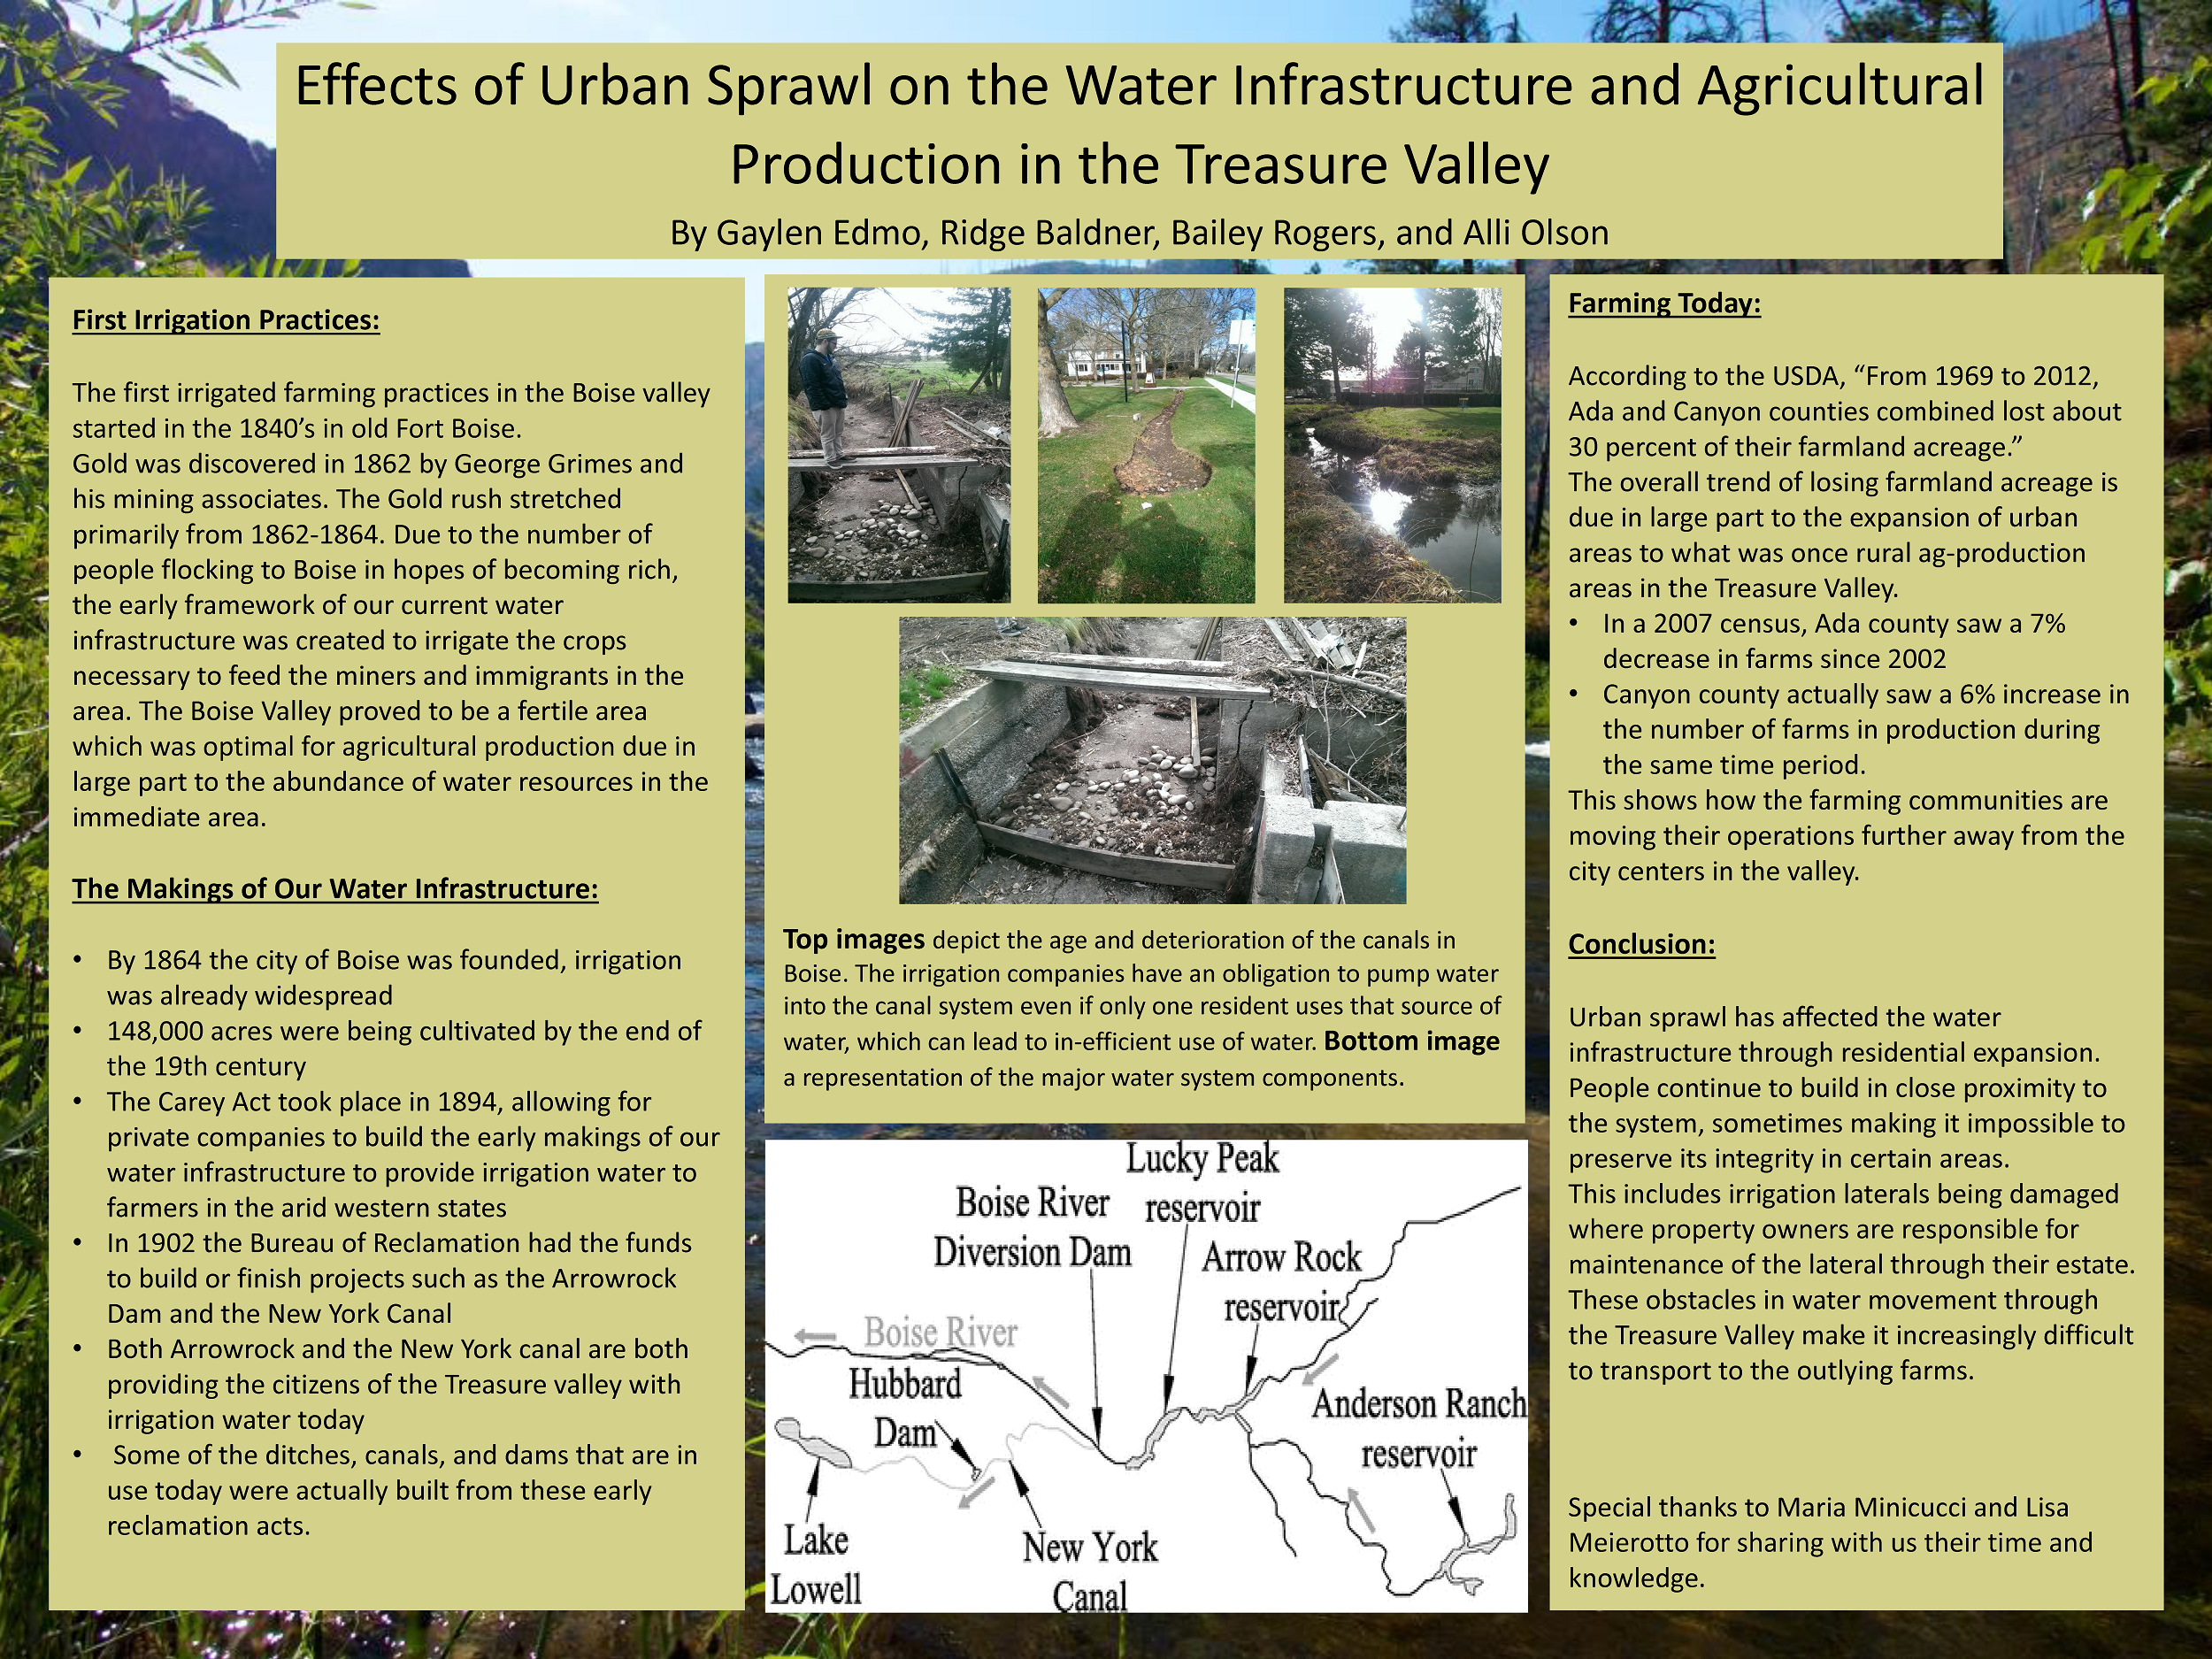 Farmland preservation poster, see page for text description or select to view full image